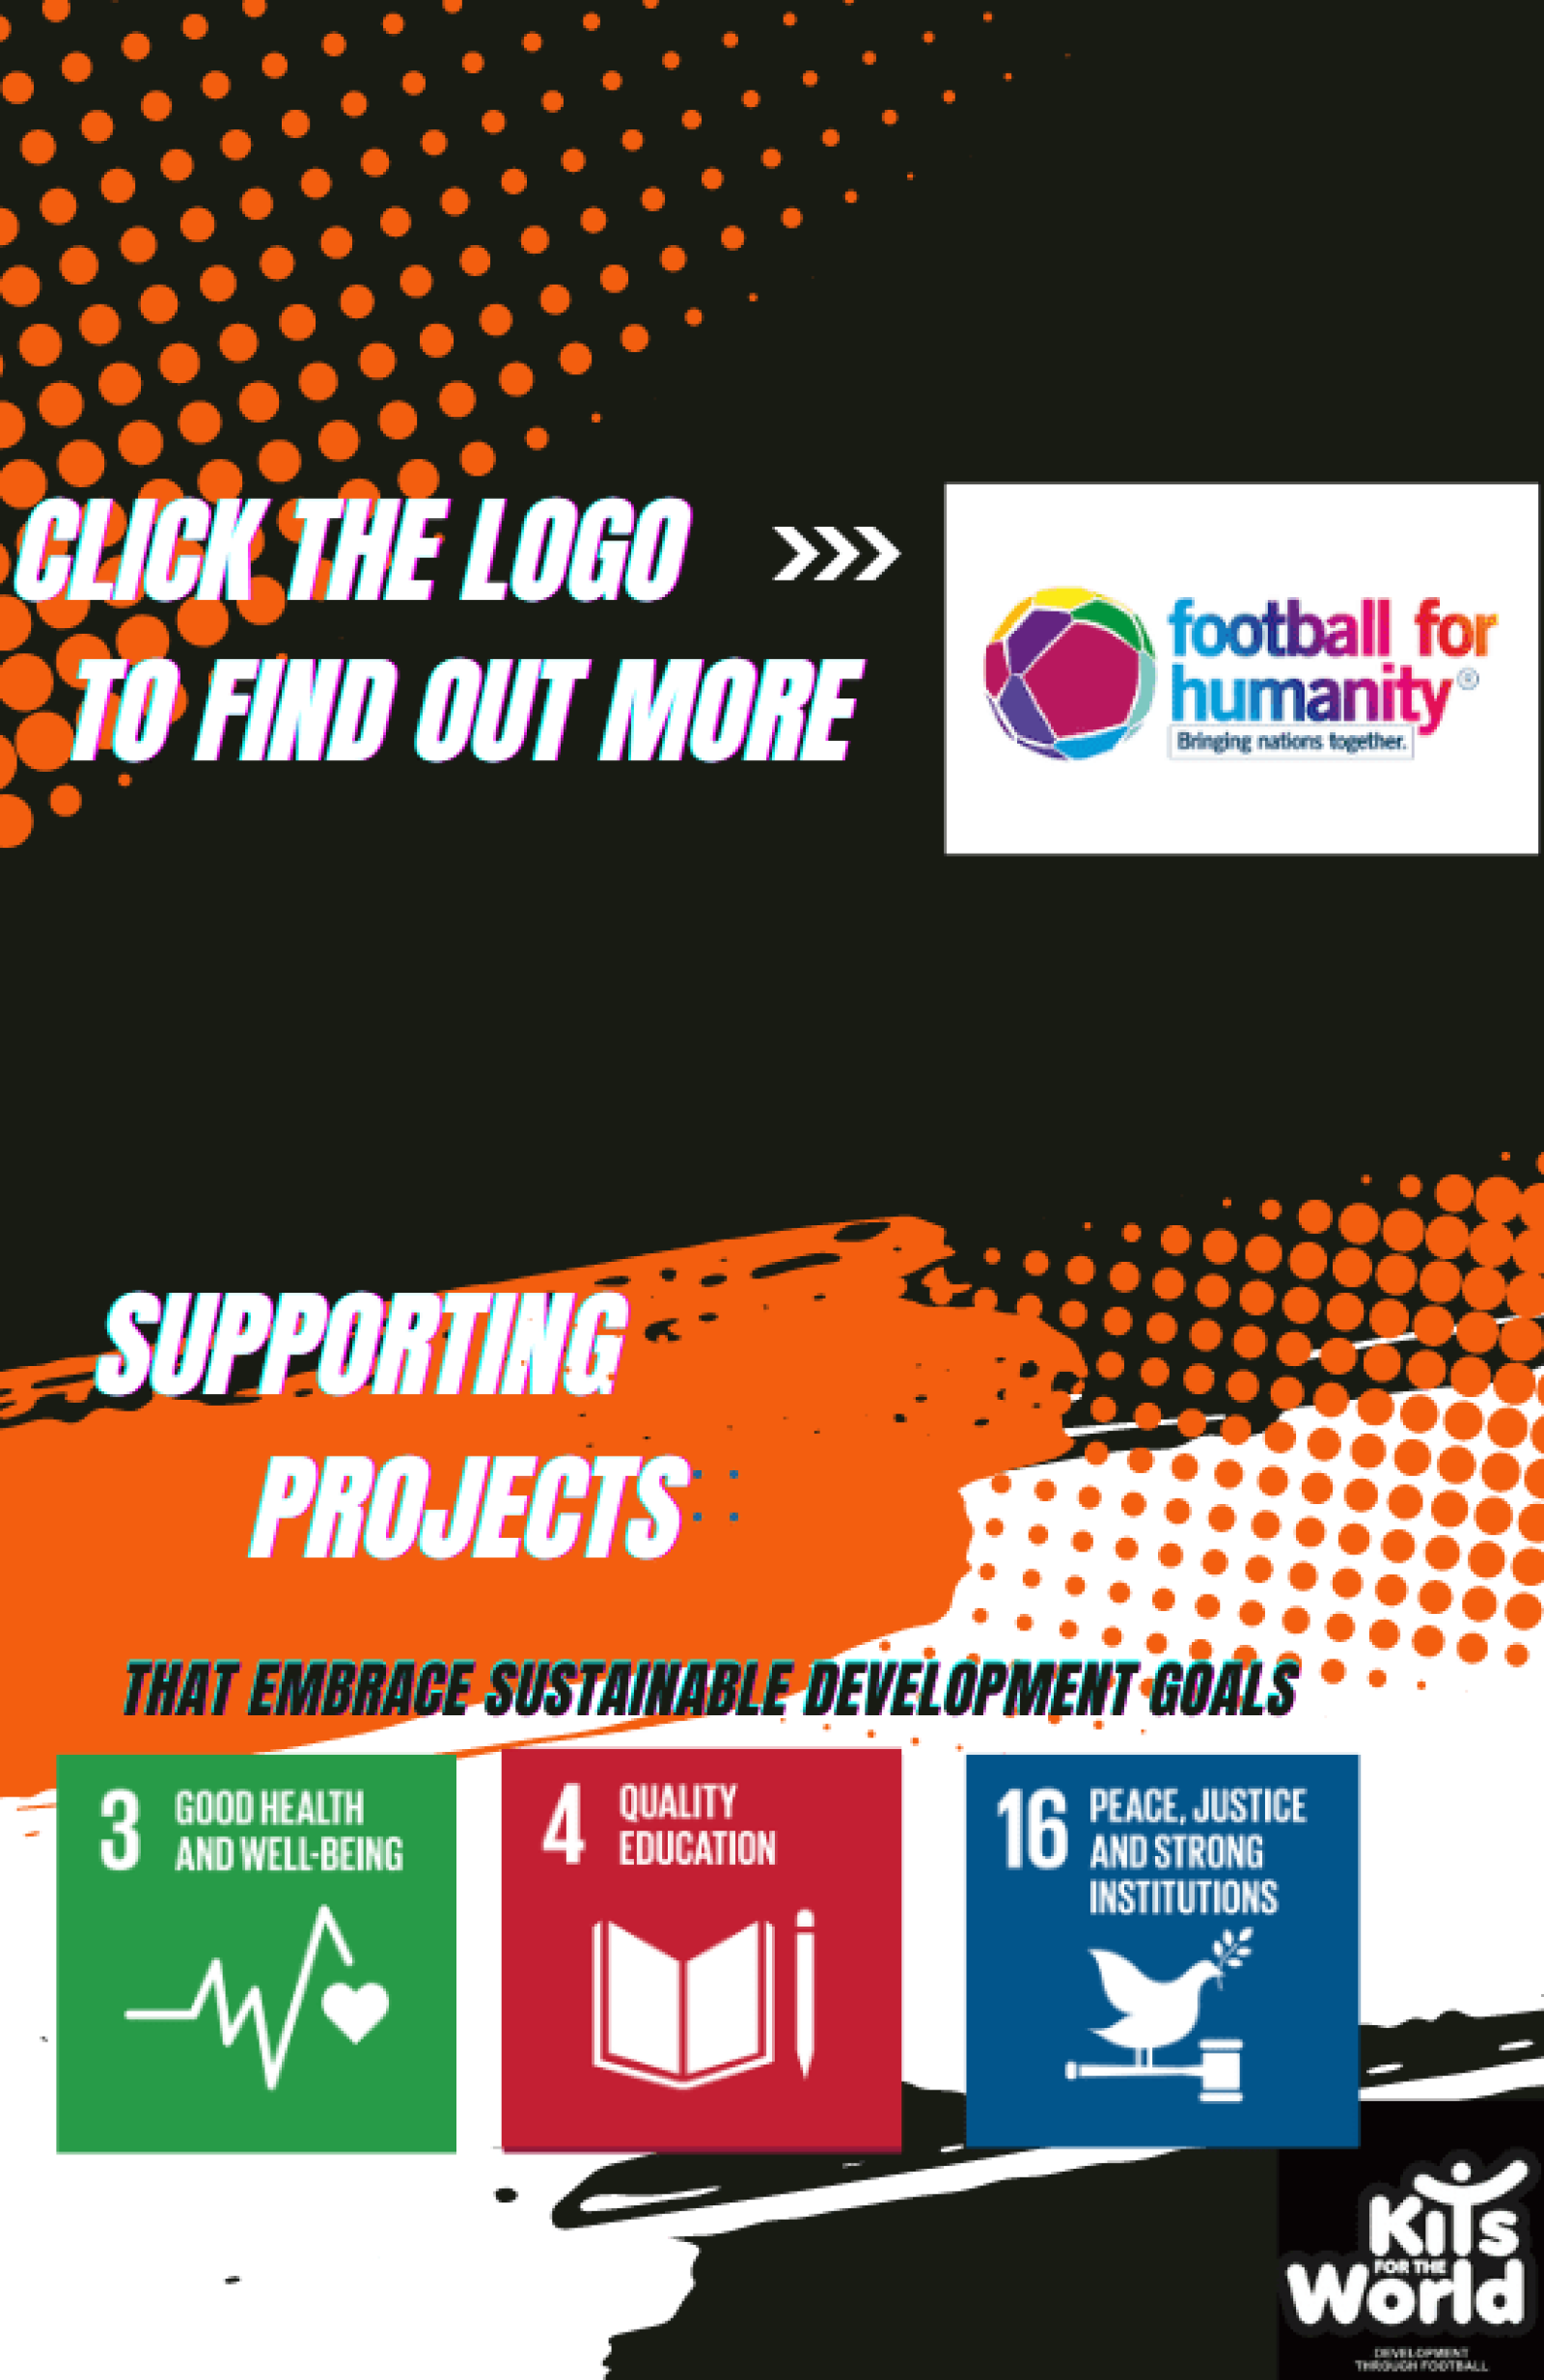 Football For Humanity and kits for the world SUSTAINABLE_DEVELOPMENT_GOALS_SDG3